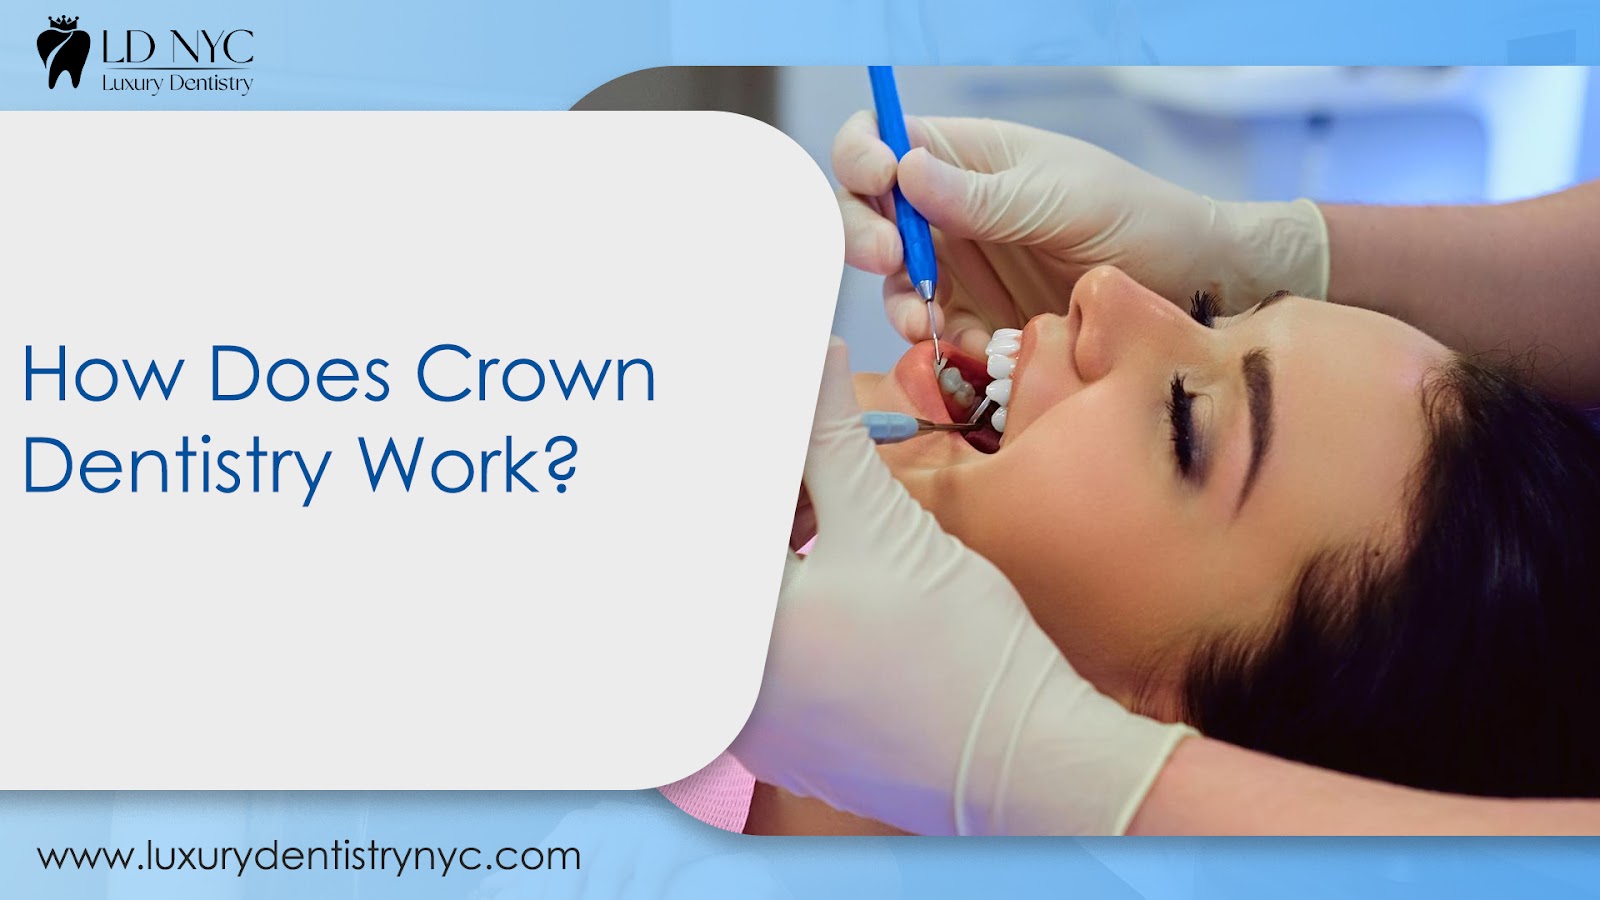 How Does Crown Dentistry Work?